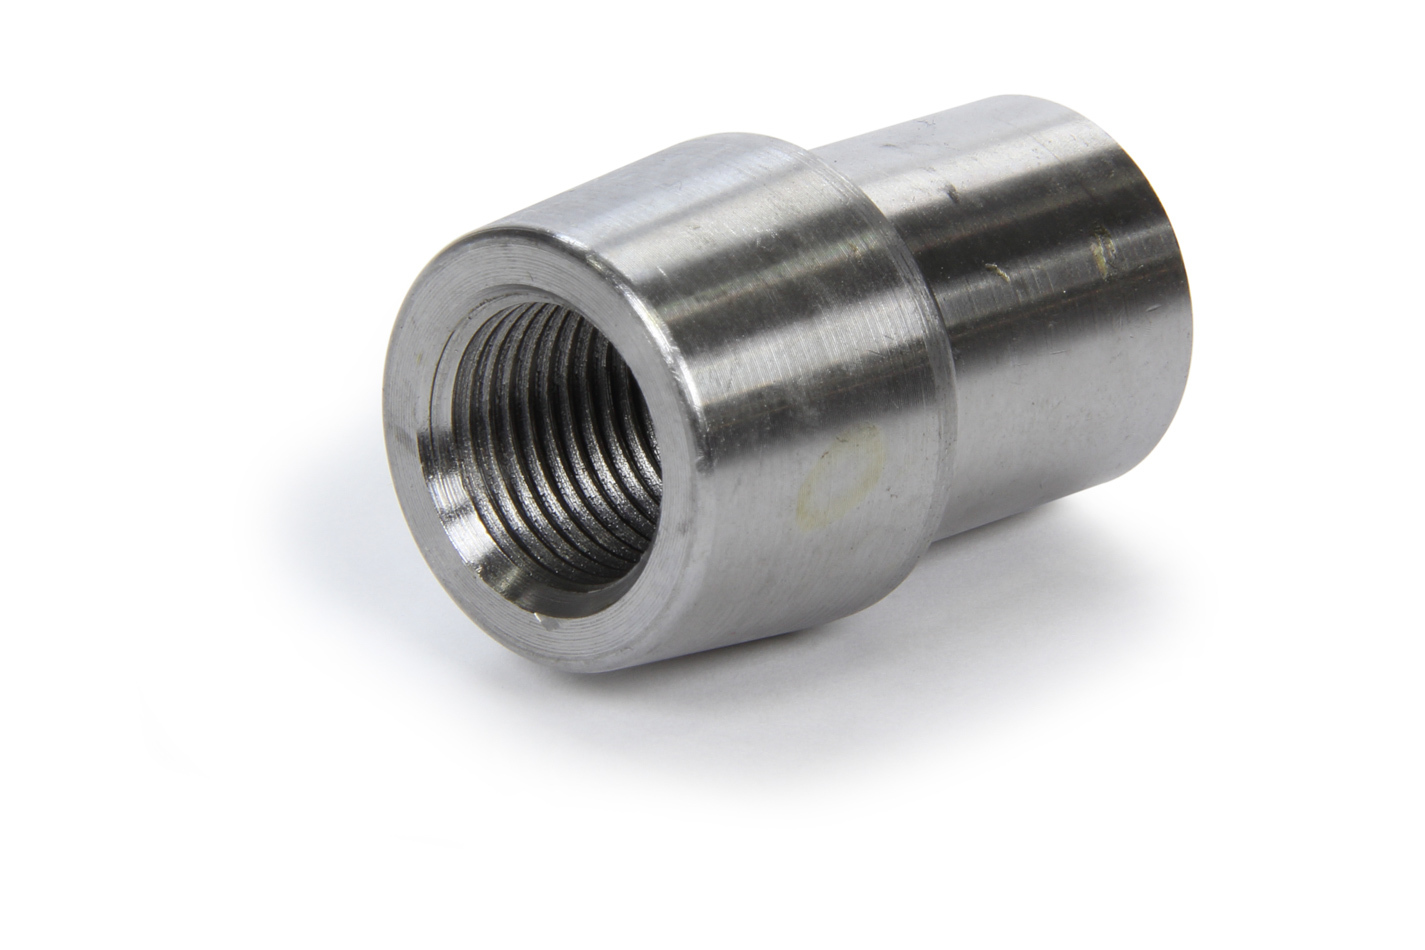 FK Rod Ends 2107L Tube End, Weld-On, Threaded, 5/8-18 in Left Hand Female Thread, 1 in Tube, 0.083 in Tube Wall, Chromoly, Natural, Each